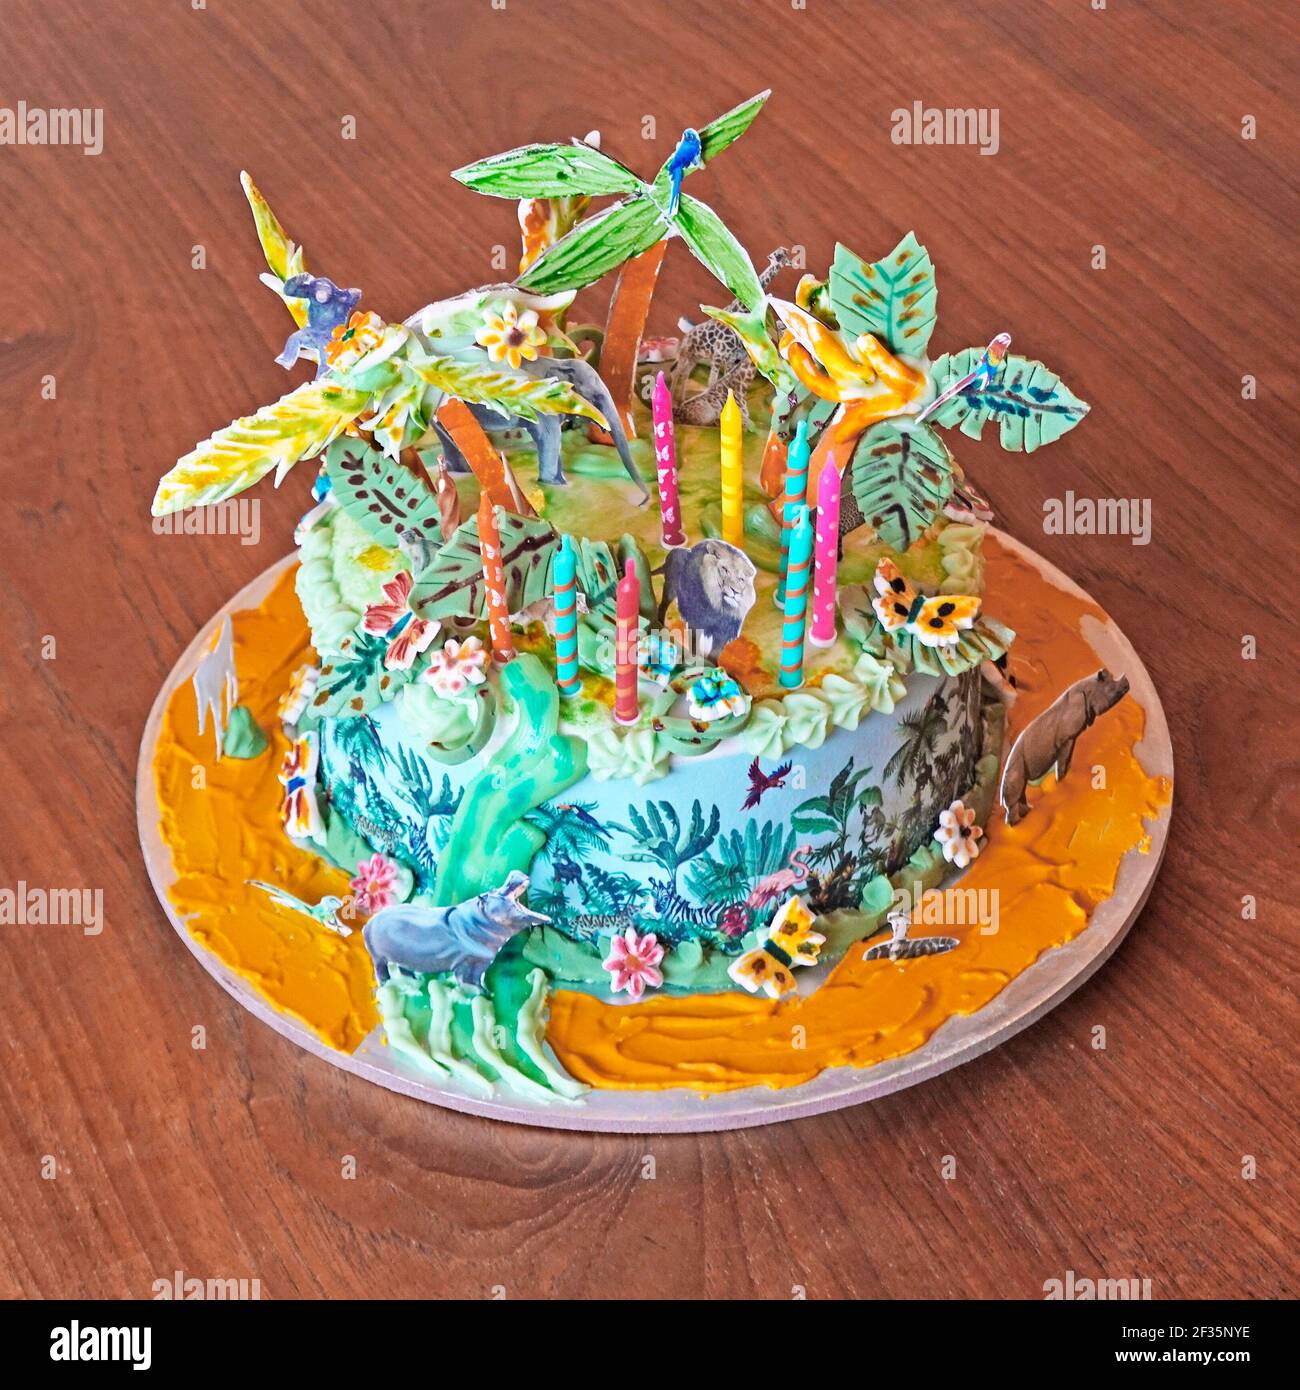 Nine year old granddaughter challenge creative grandmother to bake homemade special birthday cake with wild animals jungle theme & candles English UK Stock Photo